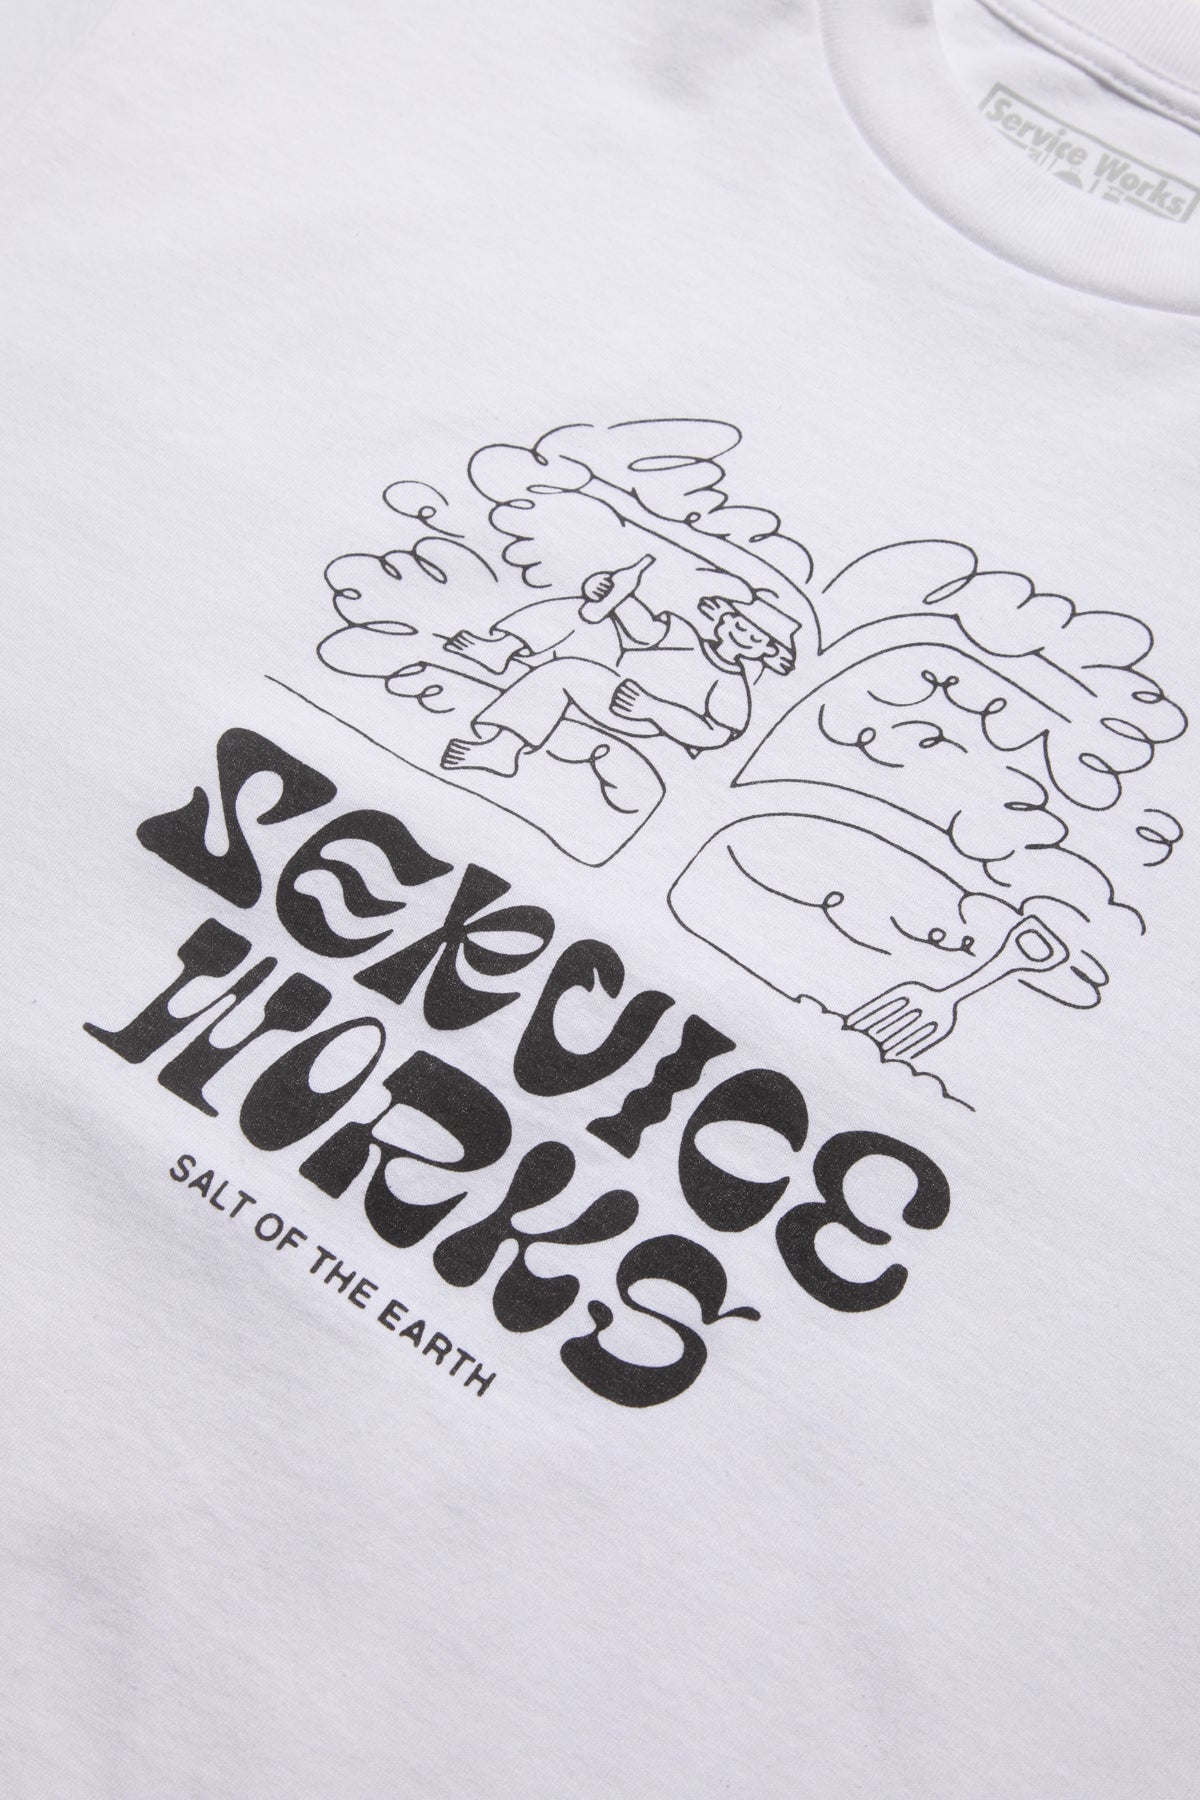 Service Works - Salt of the Earth Tee - White